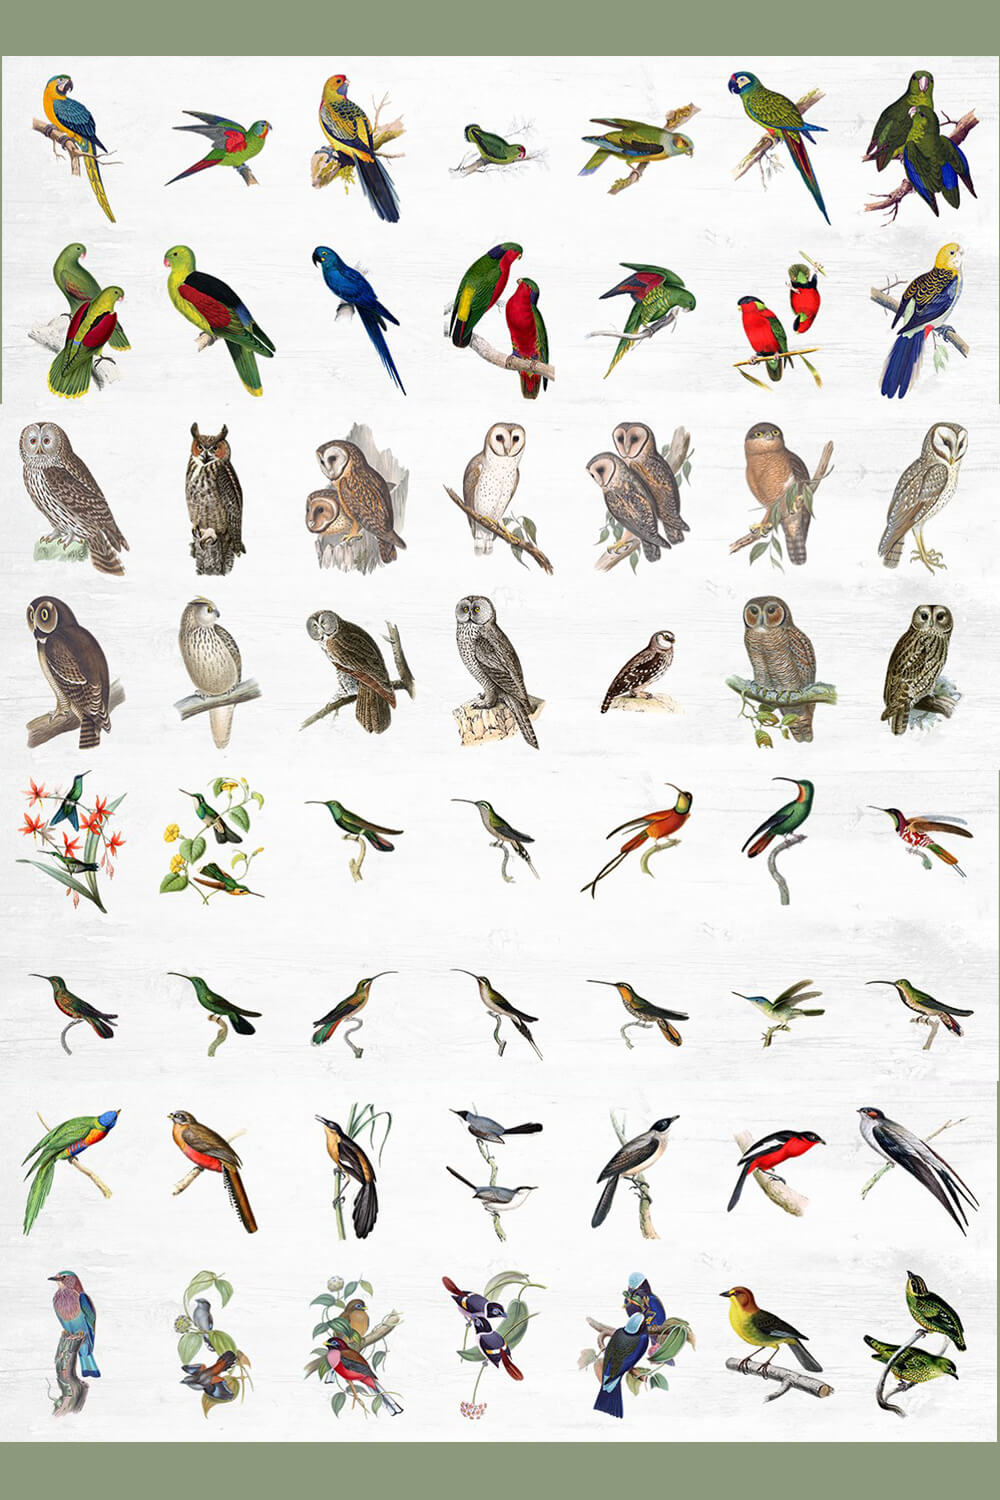 Fifty-six drawings of tropical birds.